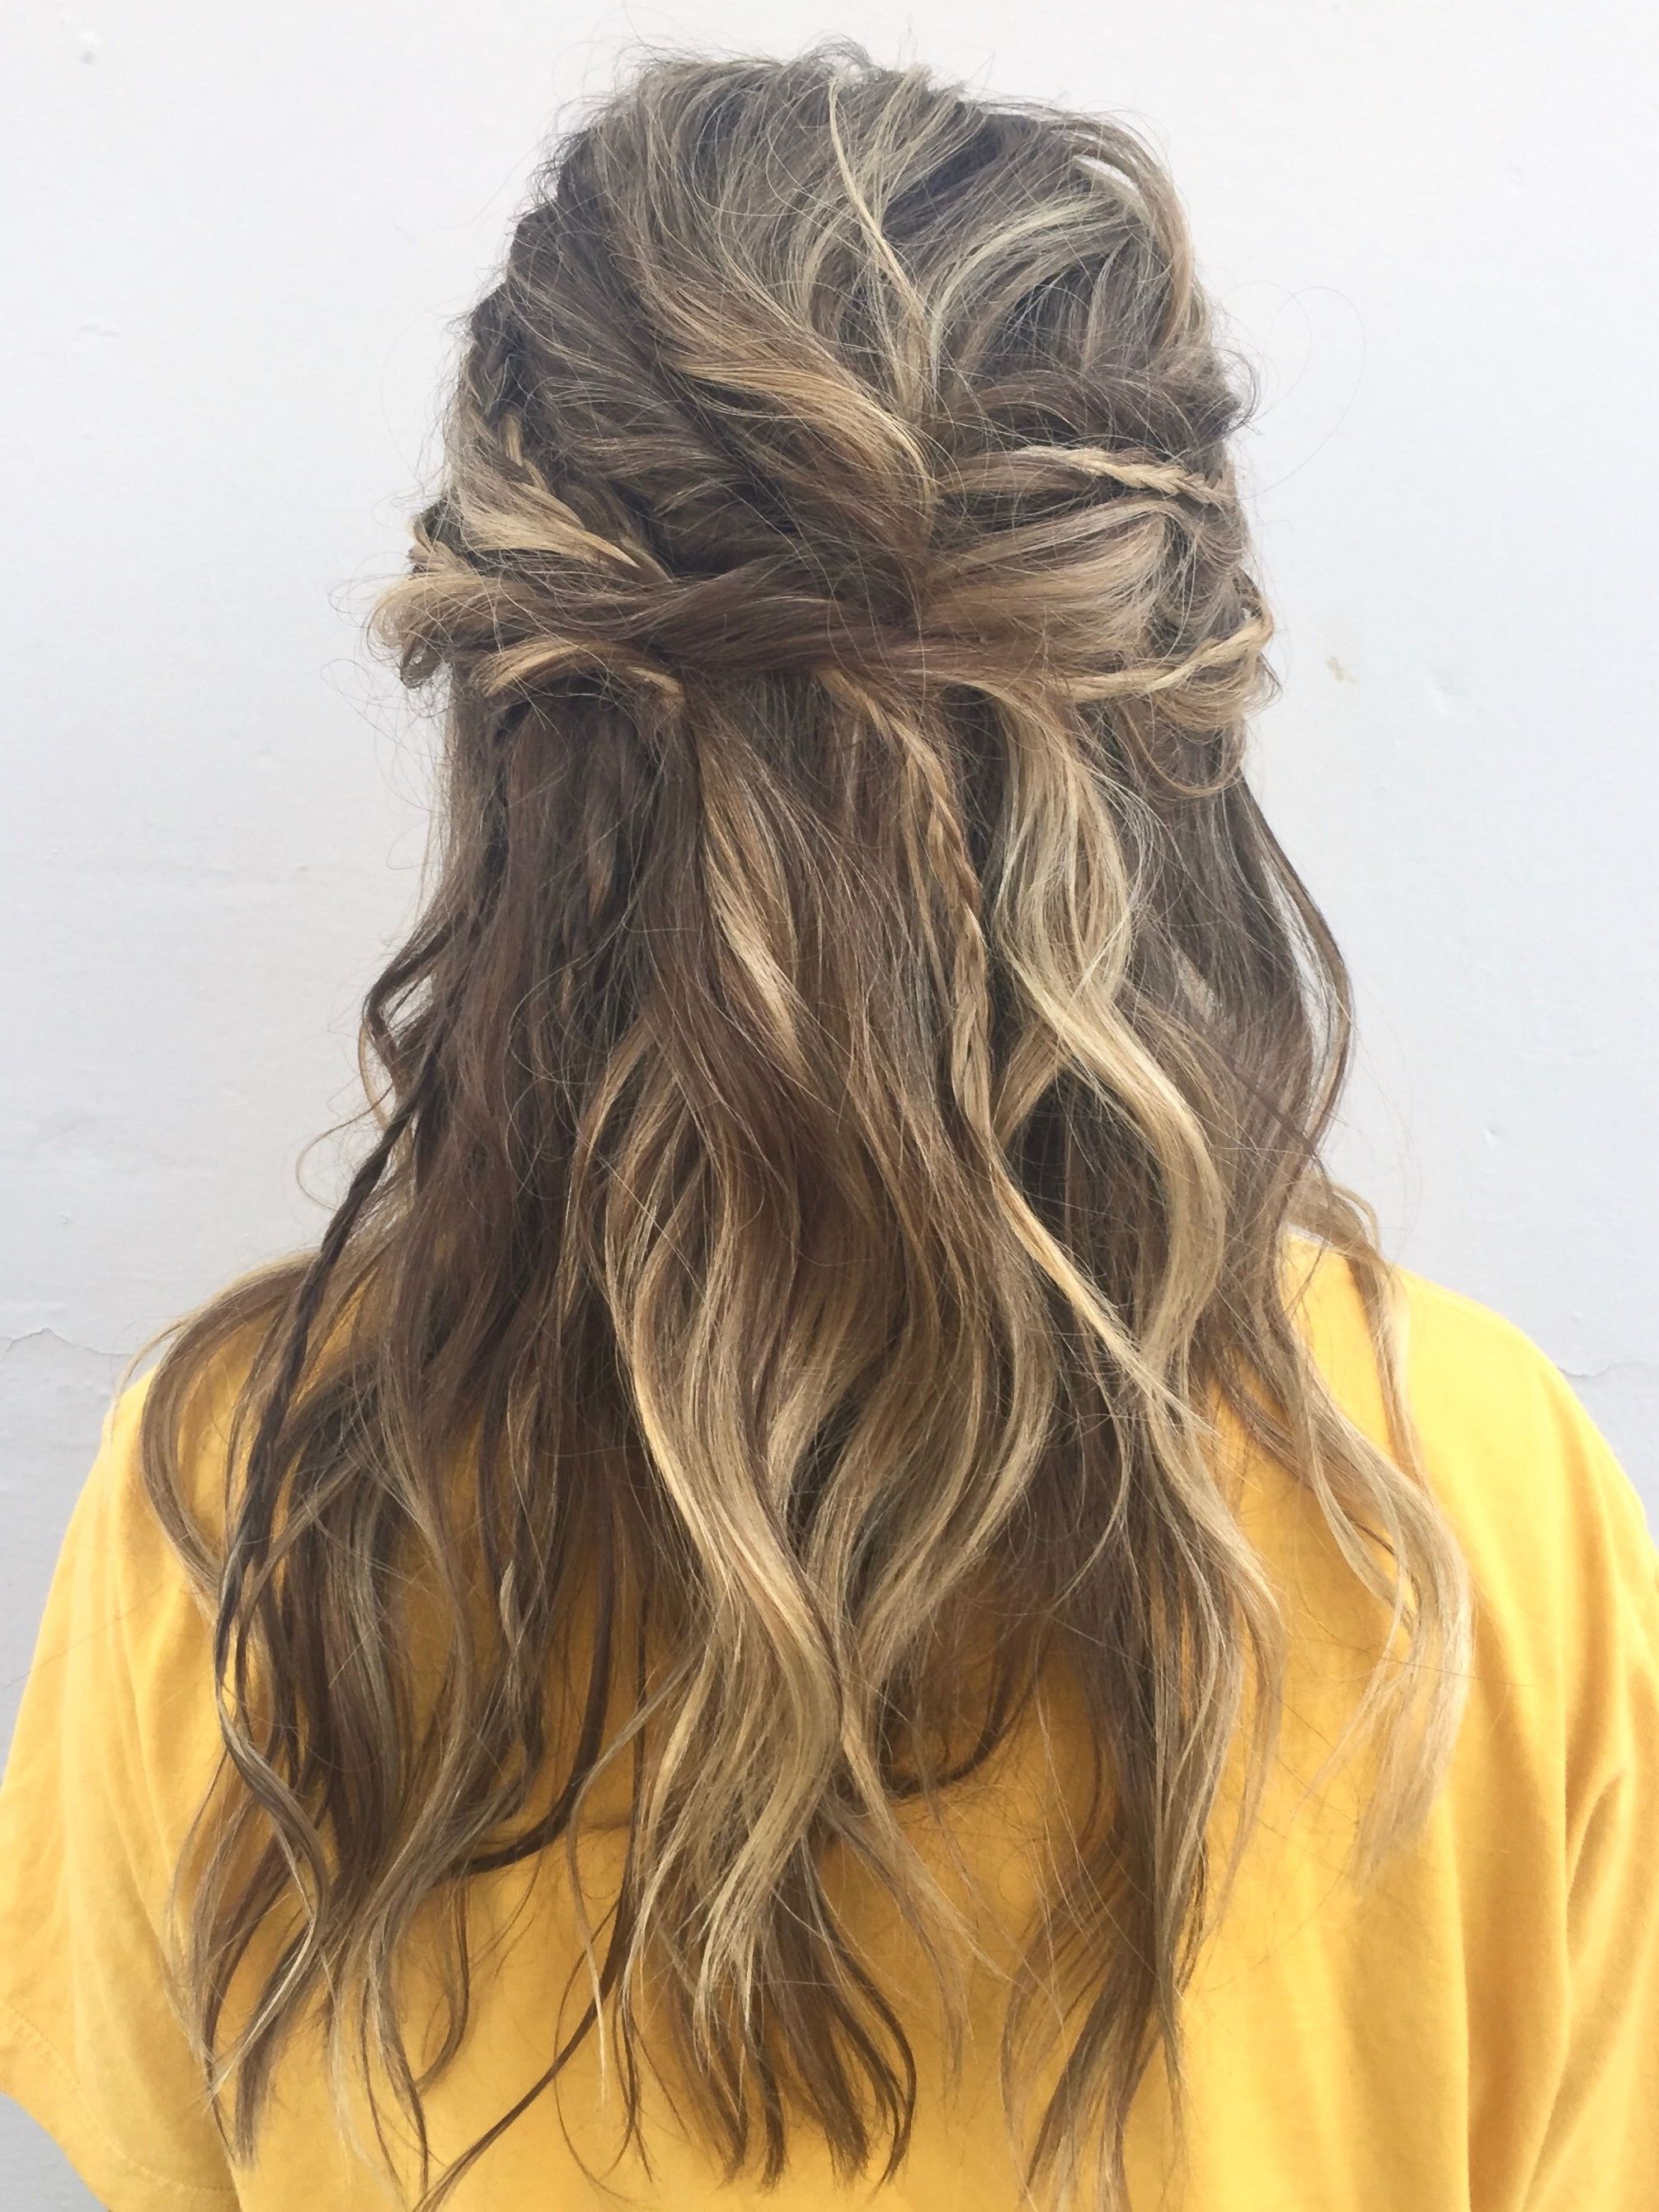 Boho Hair Prom Updo With Braids And Twists And Messy Waves Half Up For Preferred Loose Messy Waves Prom Hairstyles (View 1 of 20)